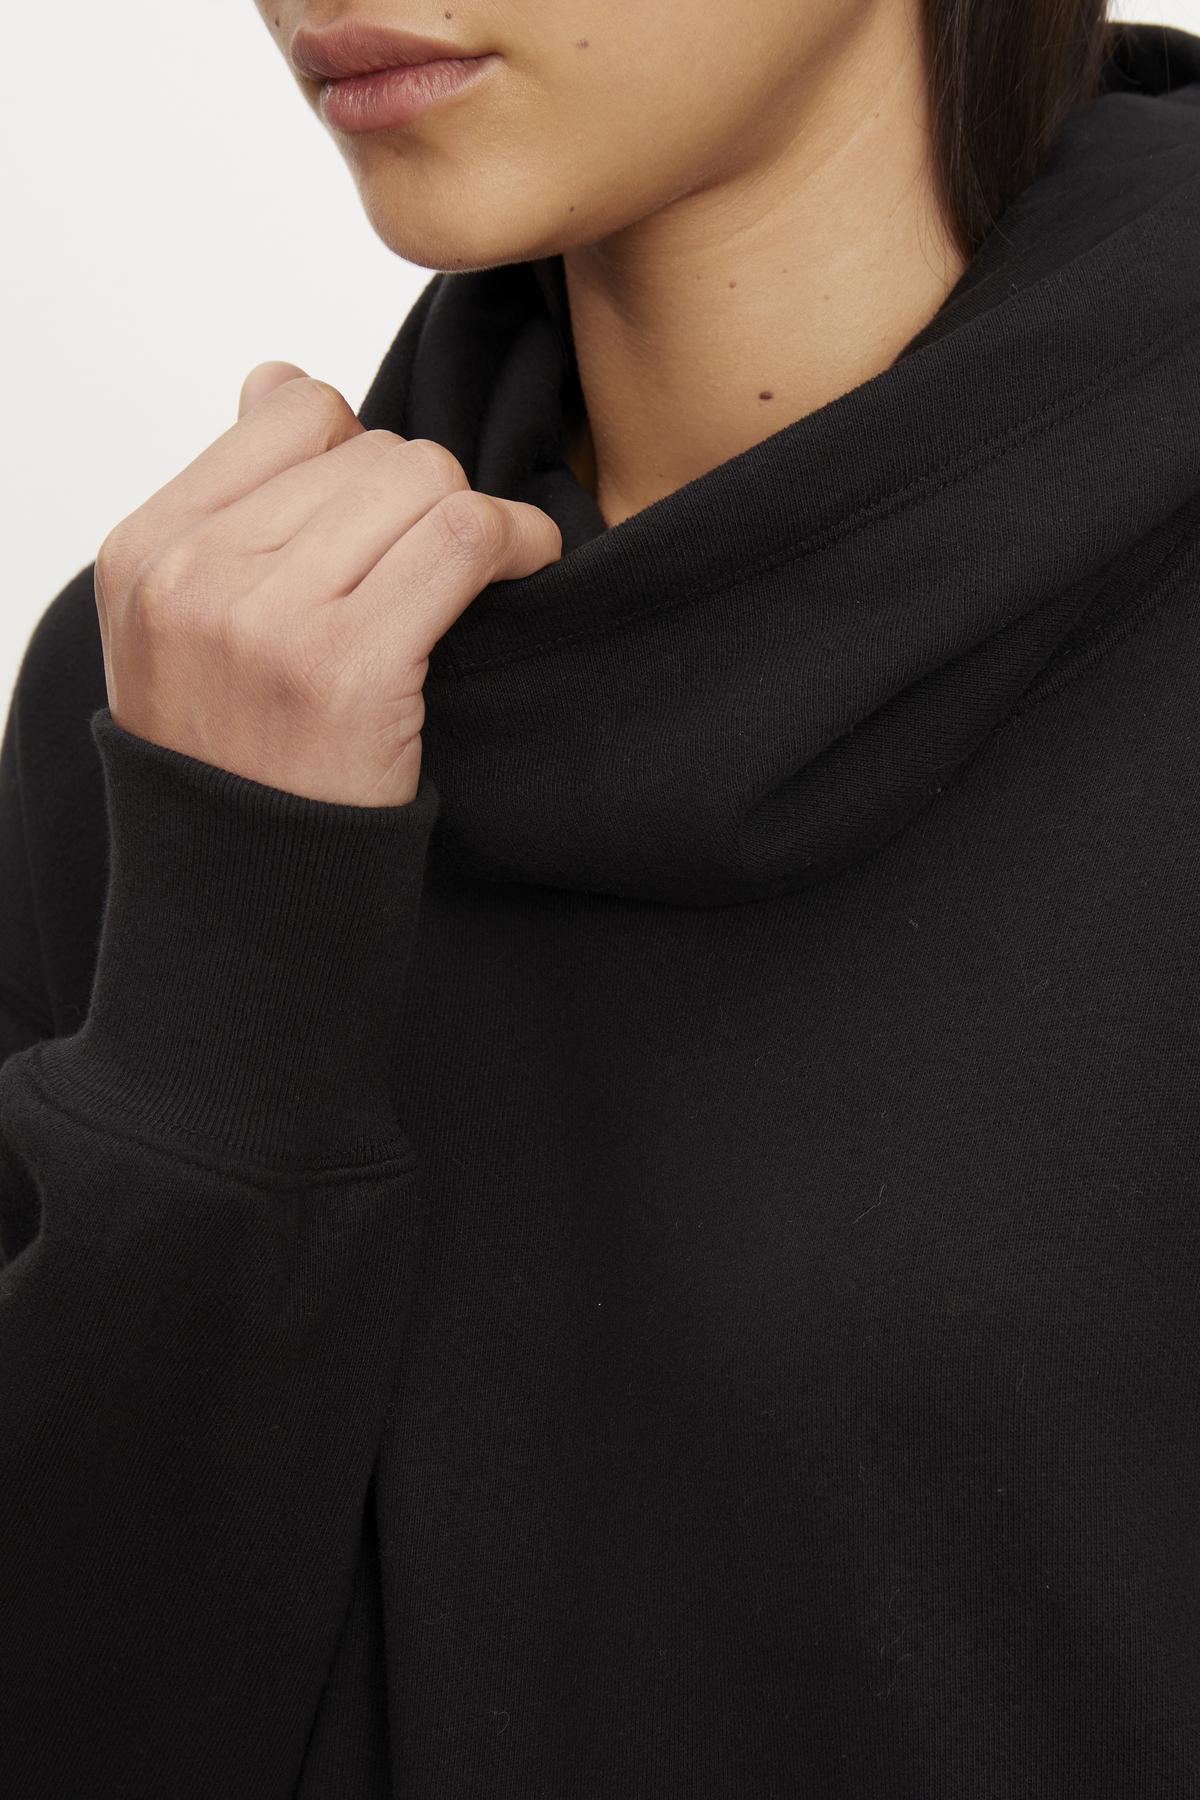   Close-up of a person wearing a black funnel neck YARA SOFT FLEECE HOODIE DRESS with an integrated snood, focusing on the lower half of the face and neck from Velvet by Graham & Spencer. 